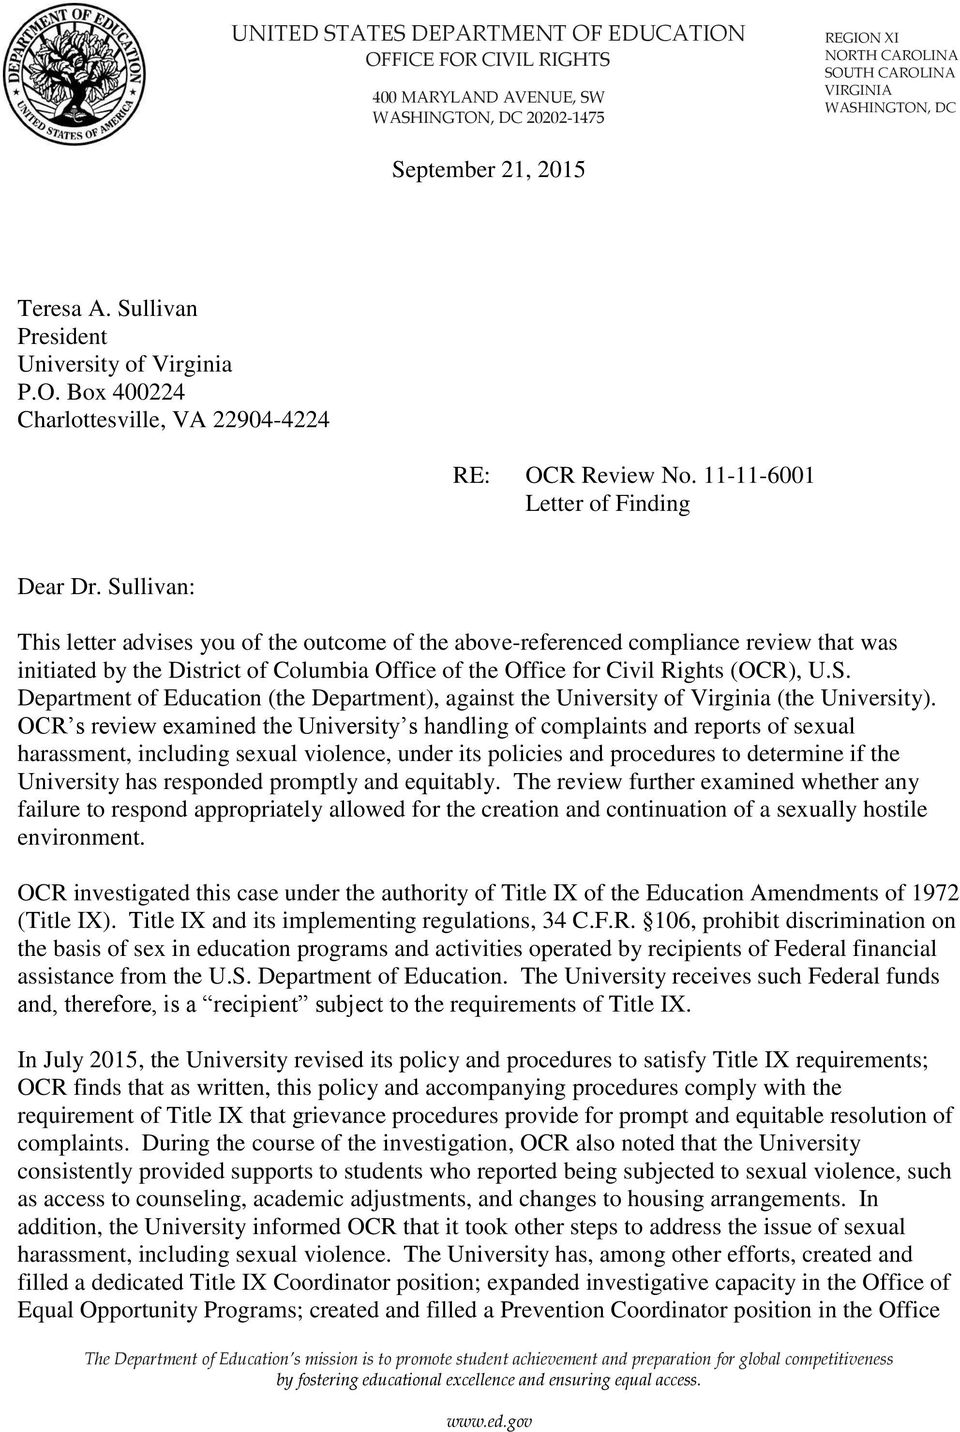 Sullivan: This letter advises you of the outcome of the above-referenced compliance review that was initiated by the District of Columbia Office of the Office for Civil Rights (OCR), U.S. Department of Education (the Department), against the University of Virginia (the University).